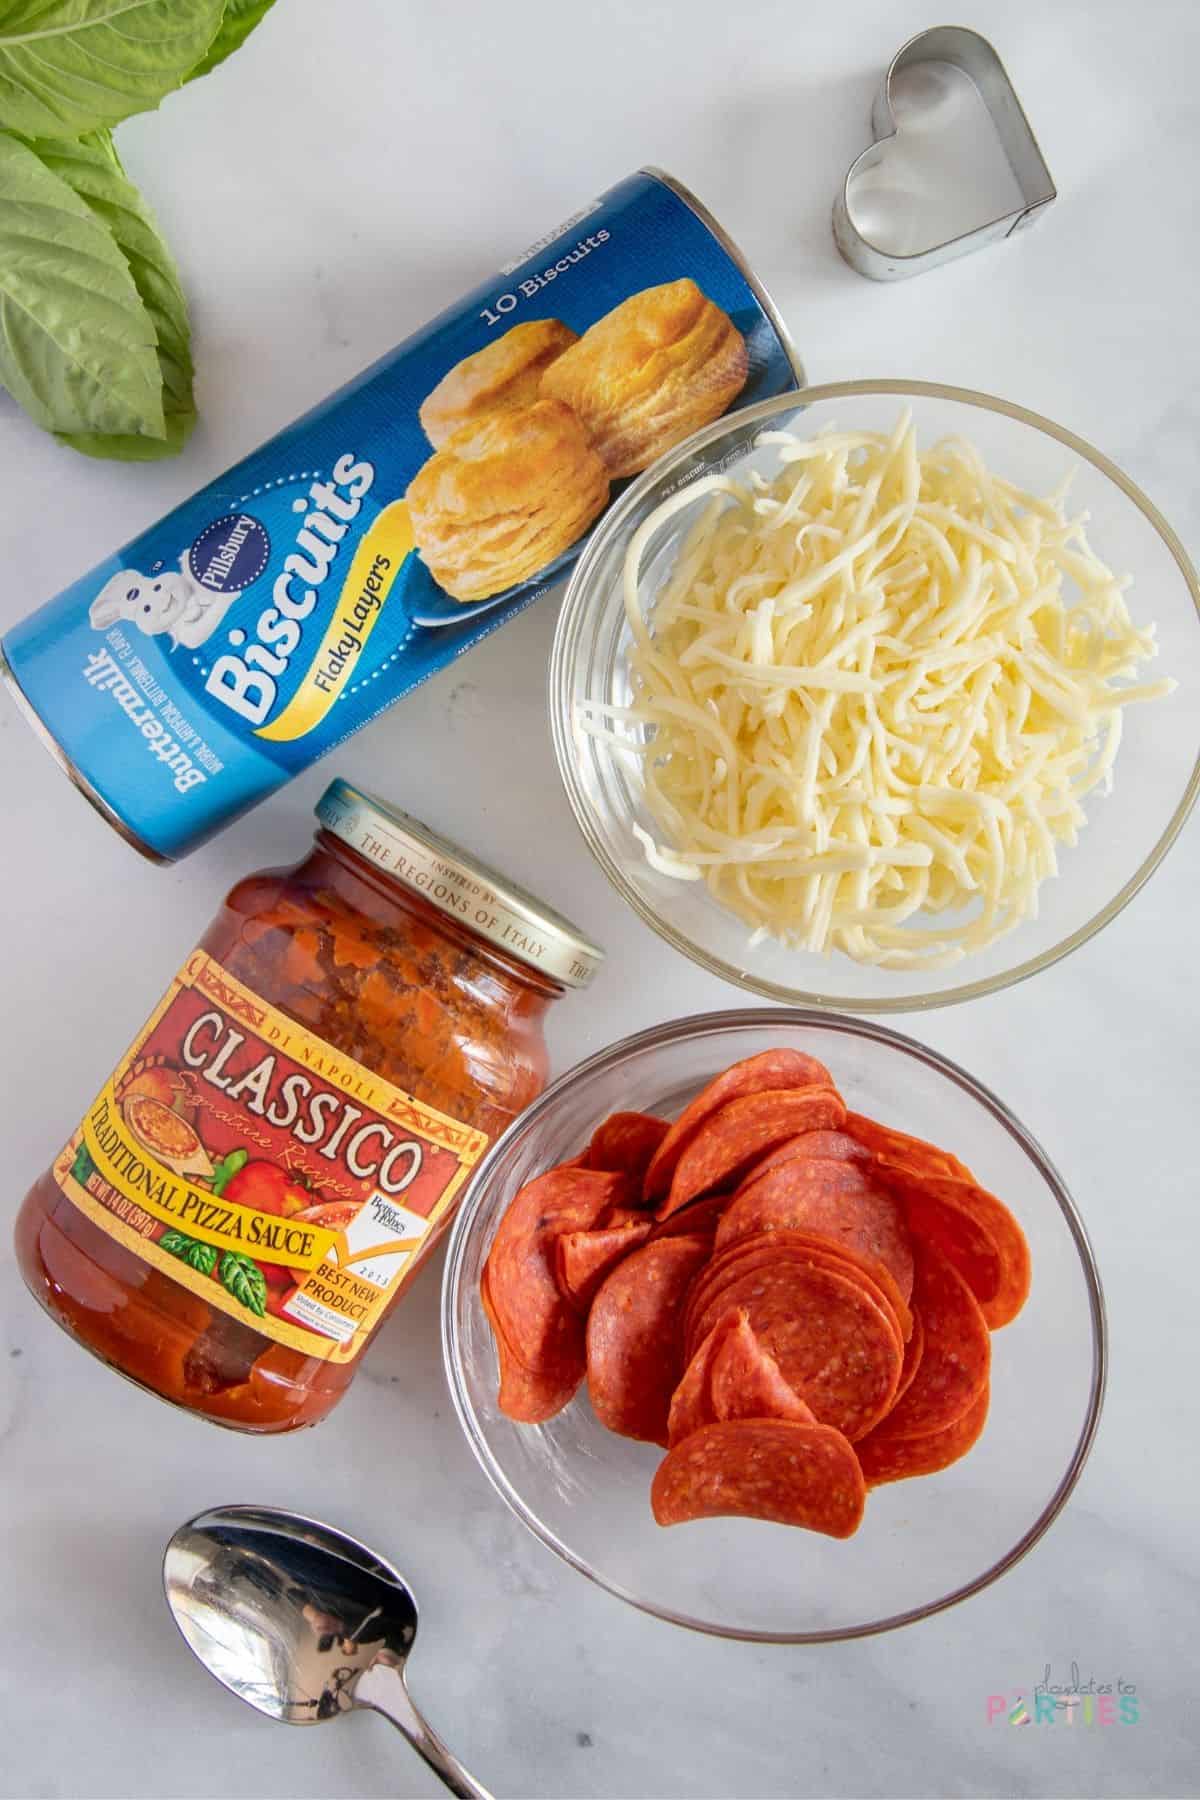 Ingredients for mini heart shaped pizza: biscuit dough, pizza sauce, mozzarella cheese, and pepperoni slices.